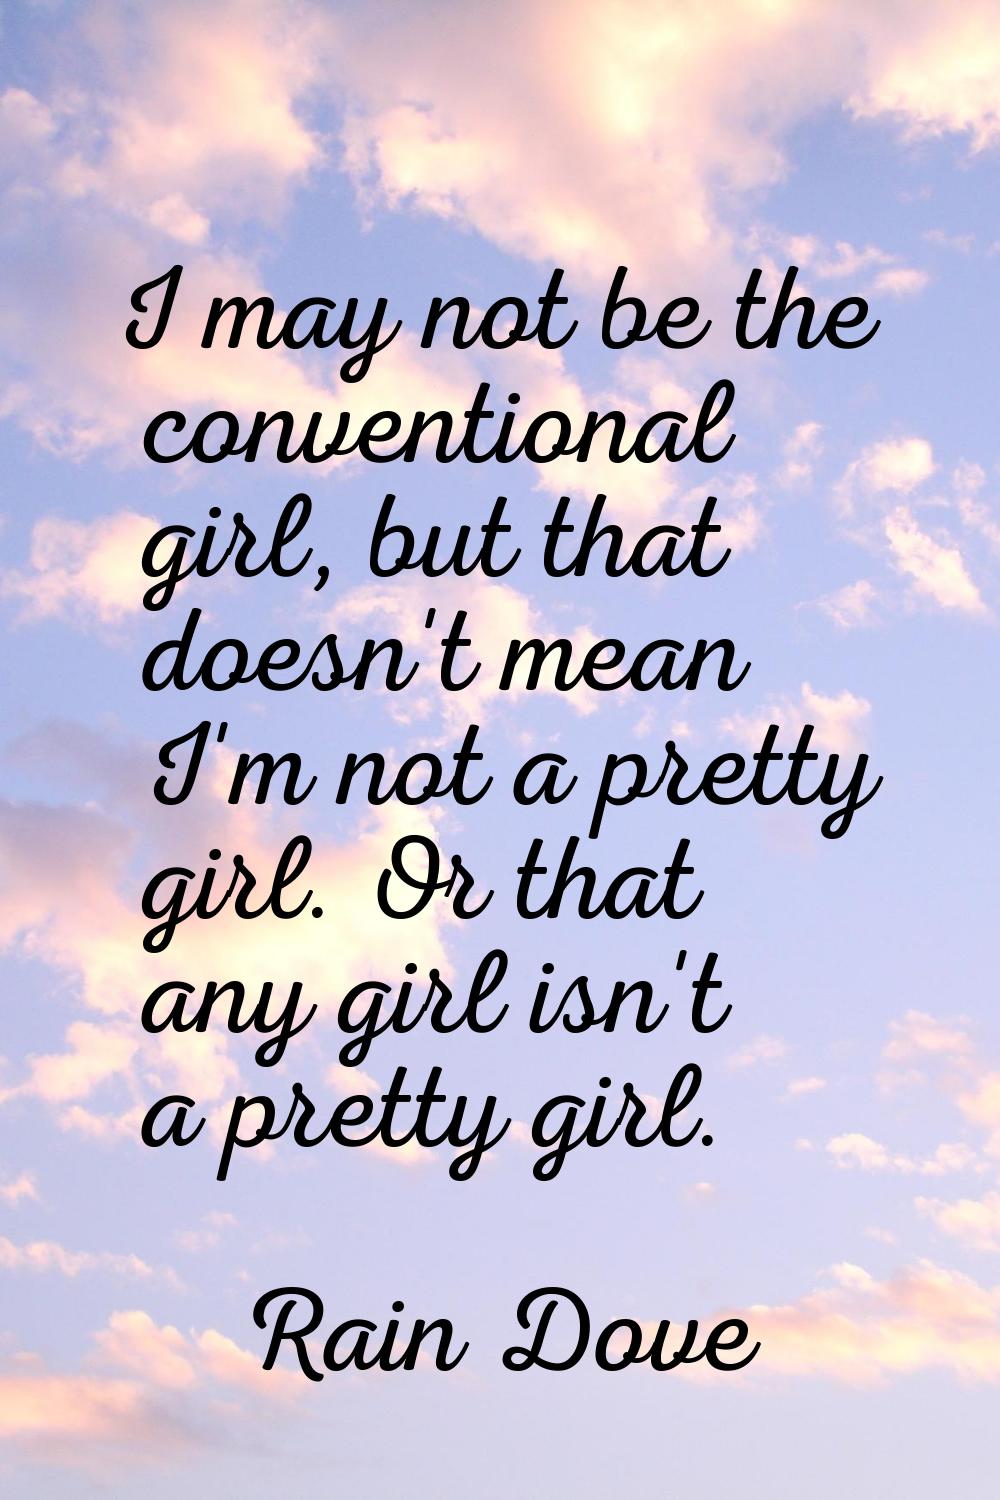 I may not be the conventional girl, but that doesn't mean I'm not a pretty girl. Or that any girl i